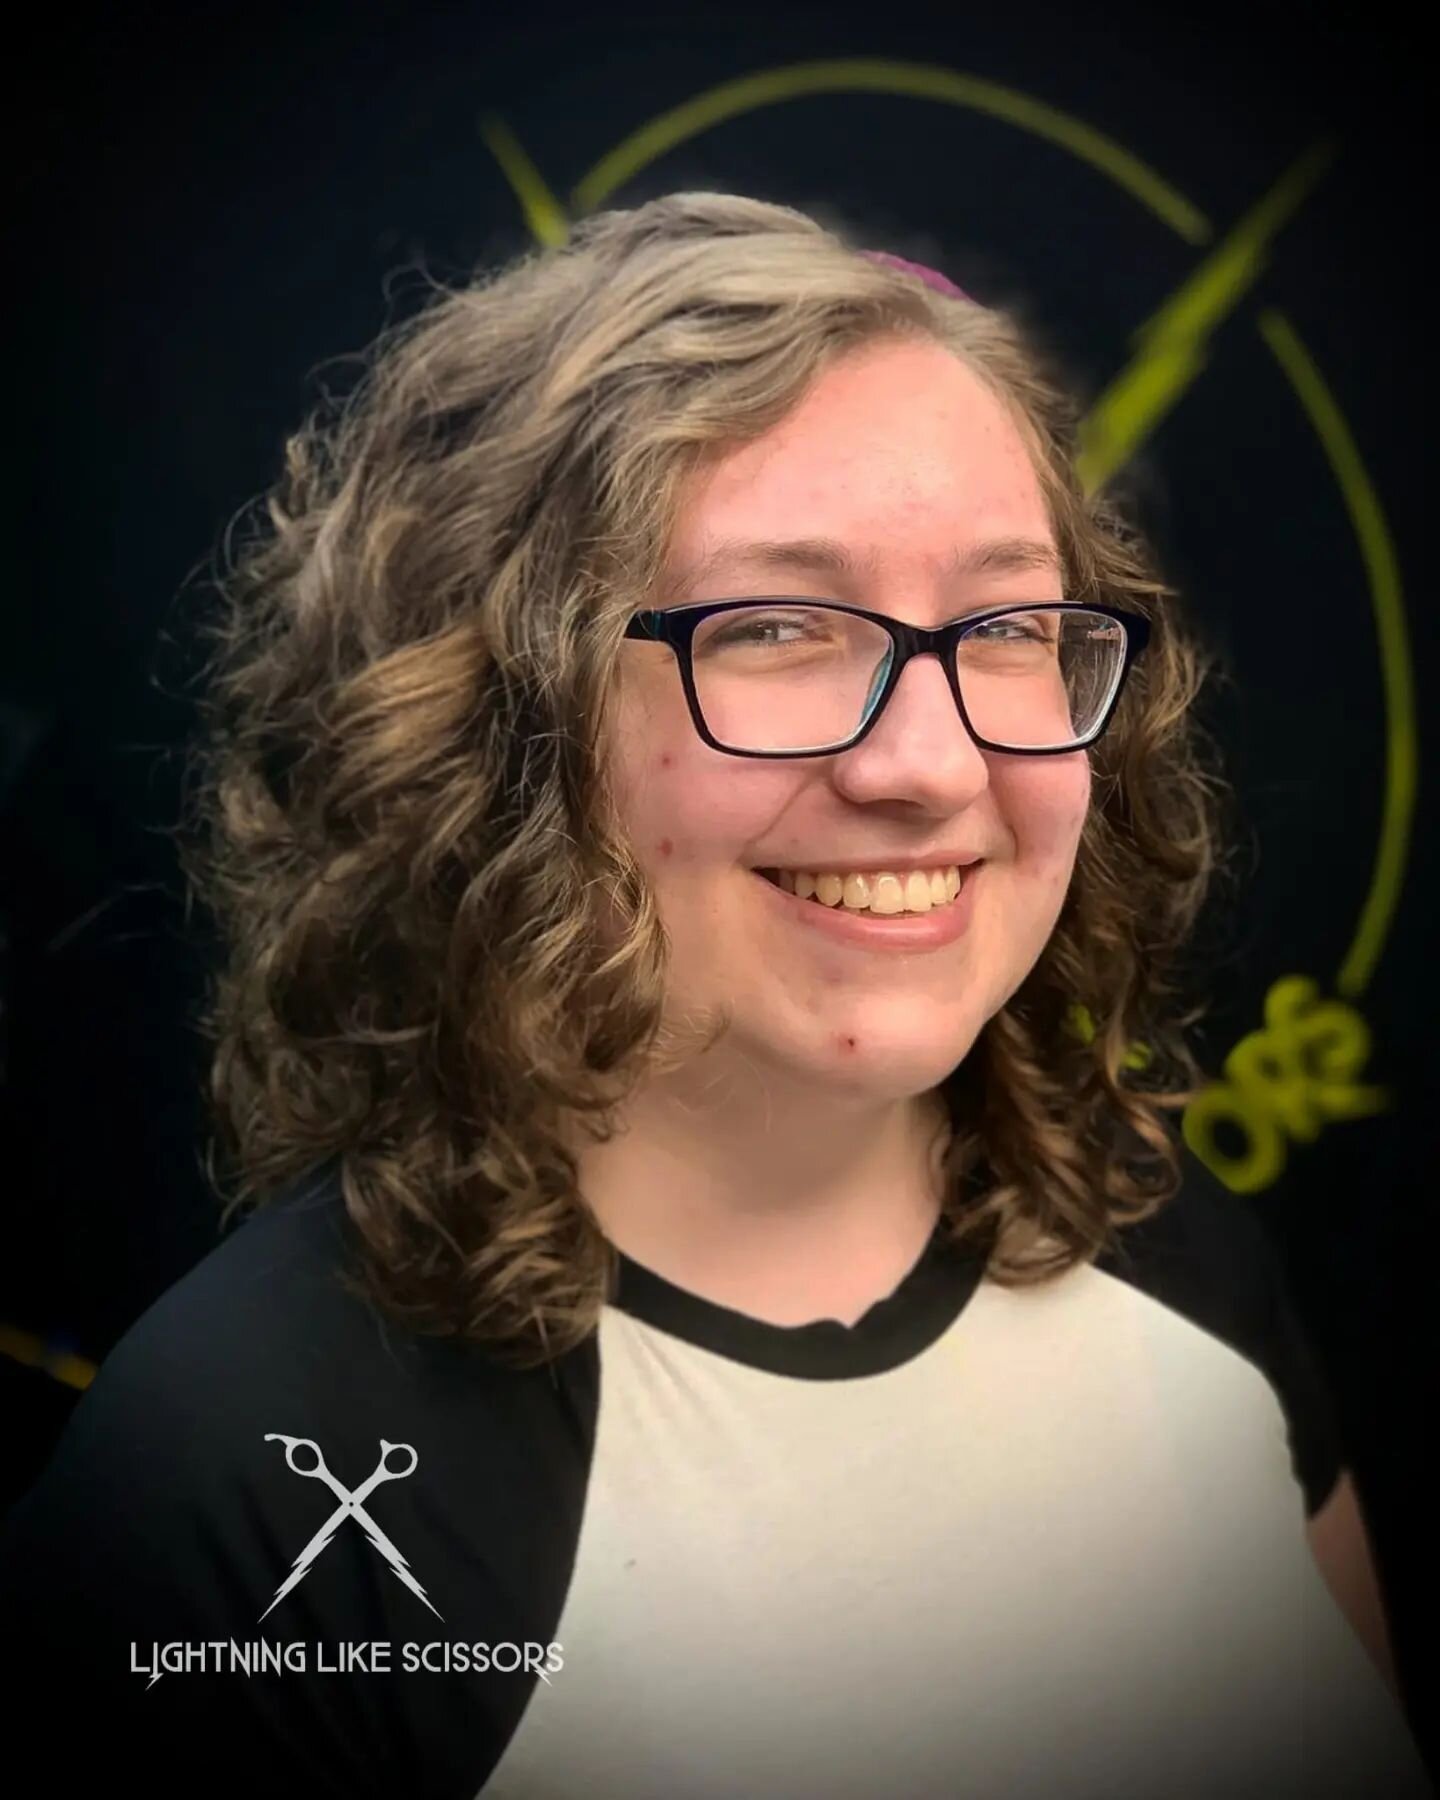 ⚡️Hel (she/her) came to us wanting a fresh lewk that's be more managable day-to-day as she studies to be a veterinary nurse. Cayden not only tamed the mane, but accentuated those gorgeous natural curls!⚡️✂️

--&gt; Swipe for before --&gt;

⚡Follow @l